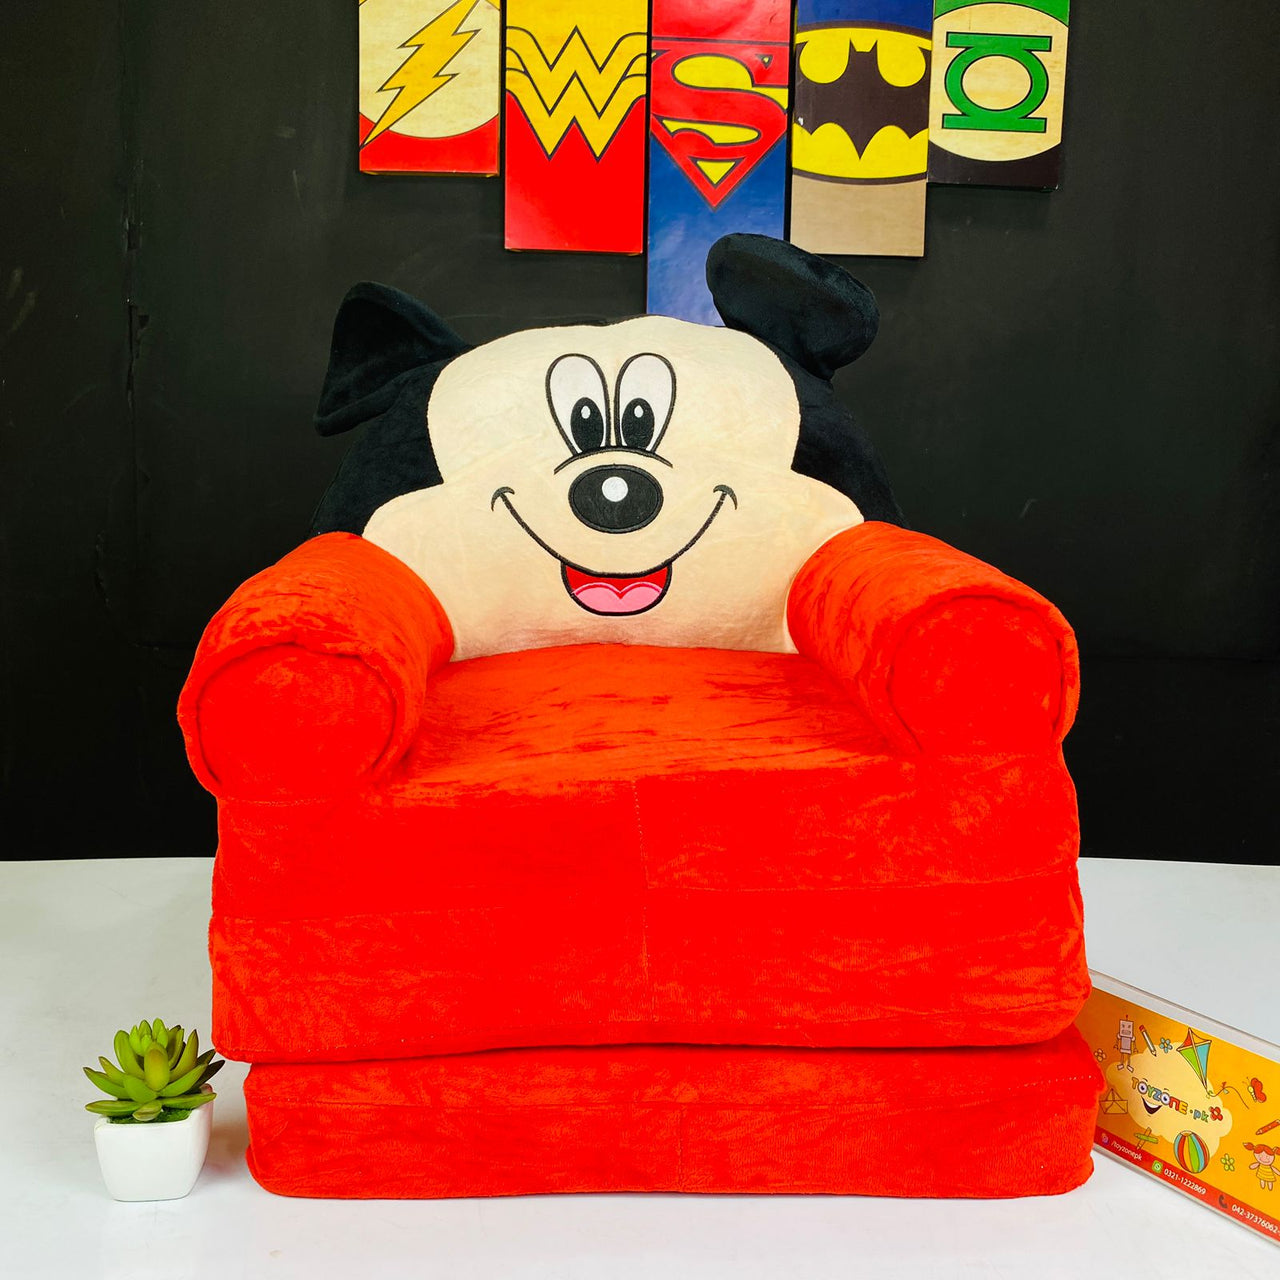 Sofa Seat For Baby In Mickey Mouse Character